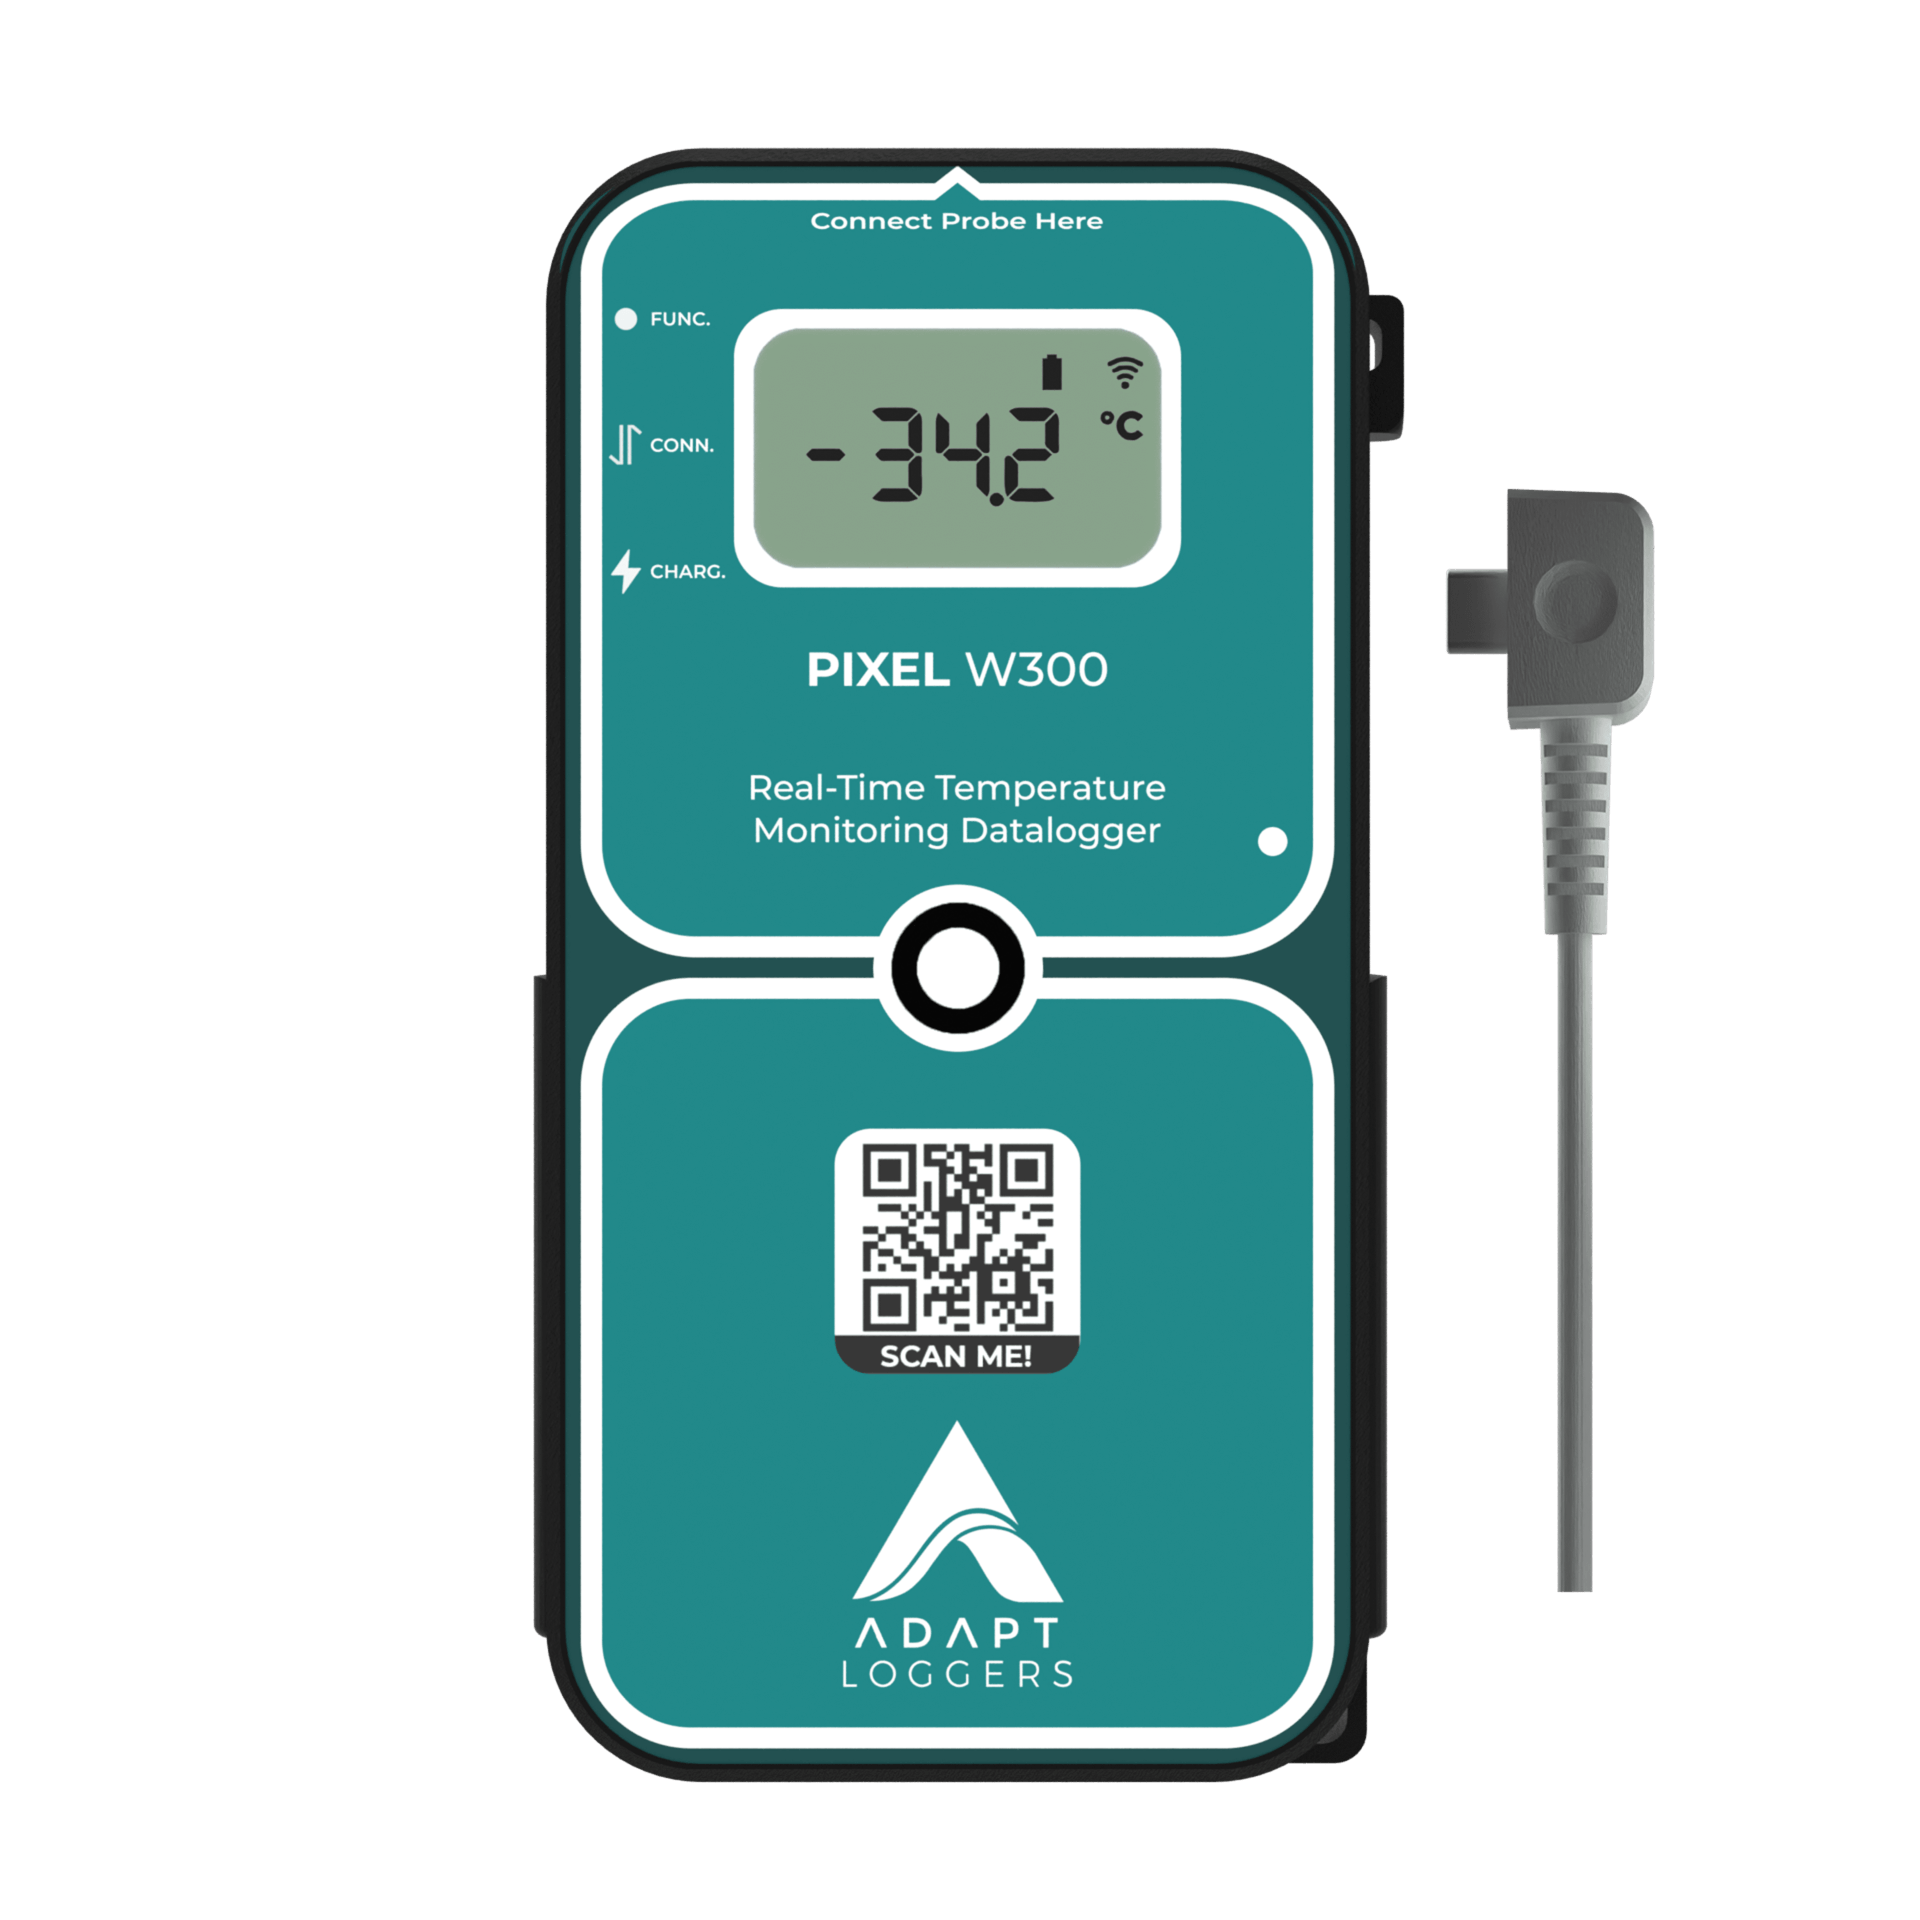 A digital thermometer with a cord attached to it.